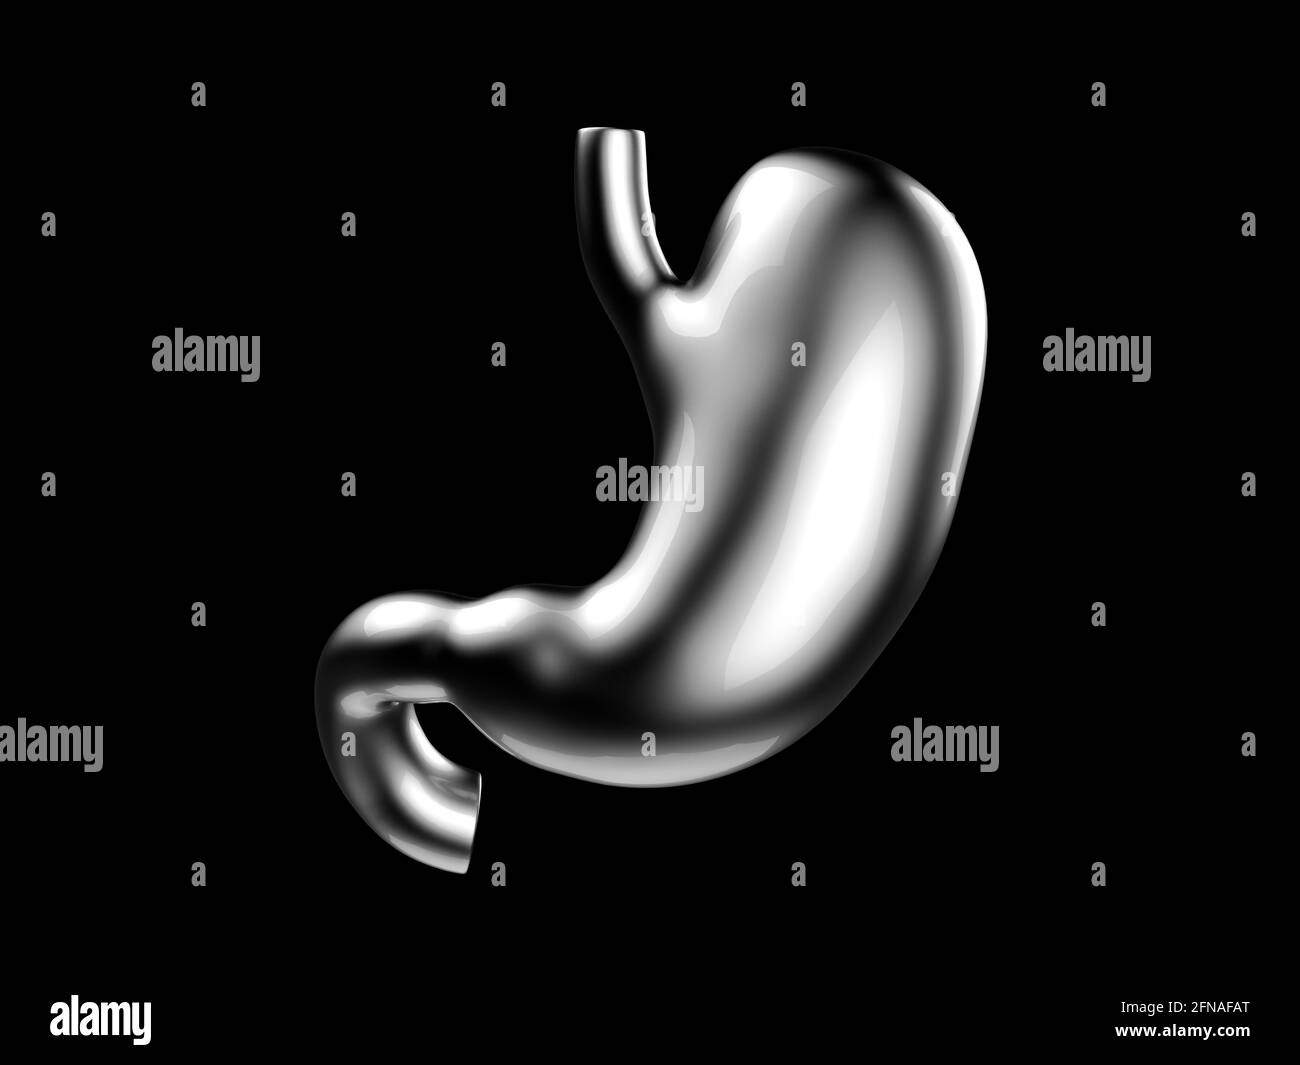 3d illustration of human stomach made of metal isolated on black background Stock Photo